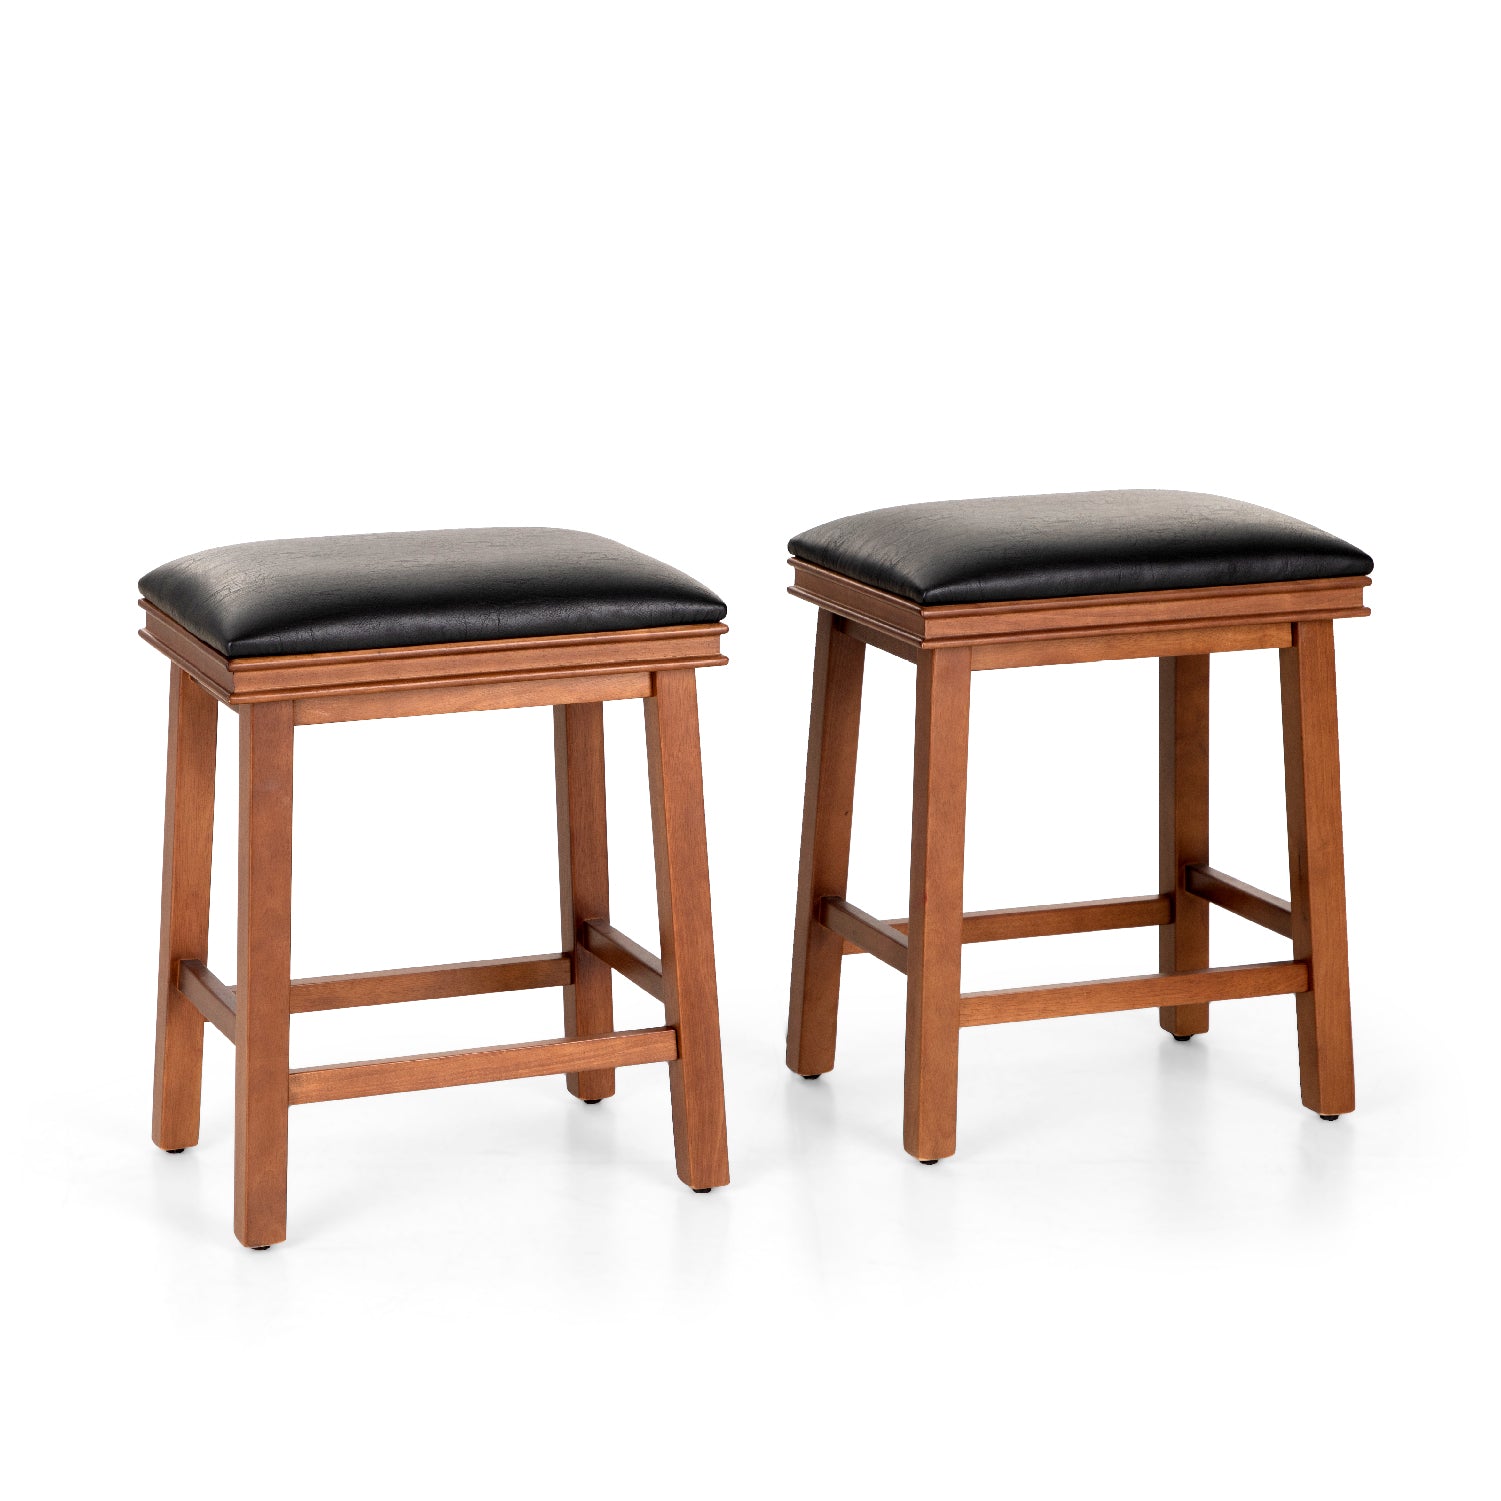 PHI VILLA PU Leather 24" Counter Height Bar Stool with Wood Legs, Set of 2